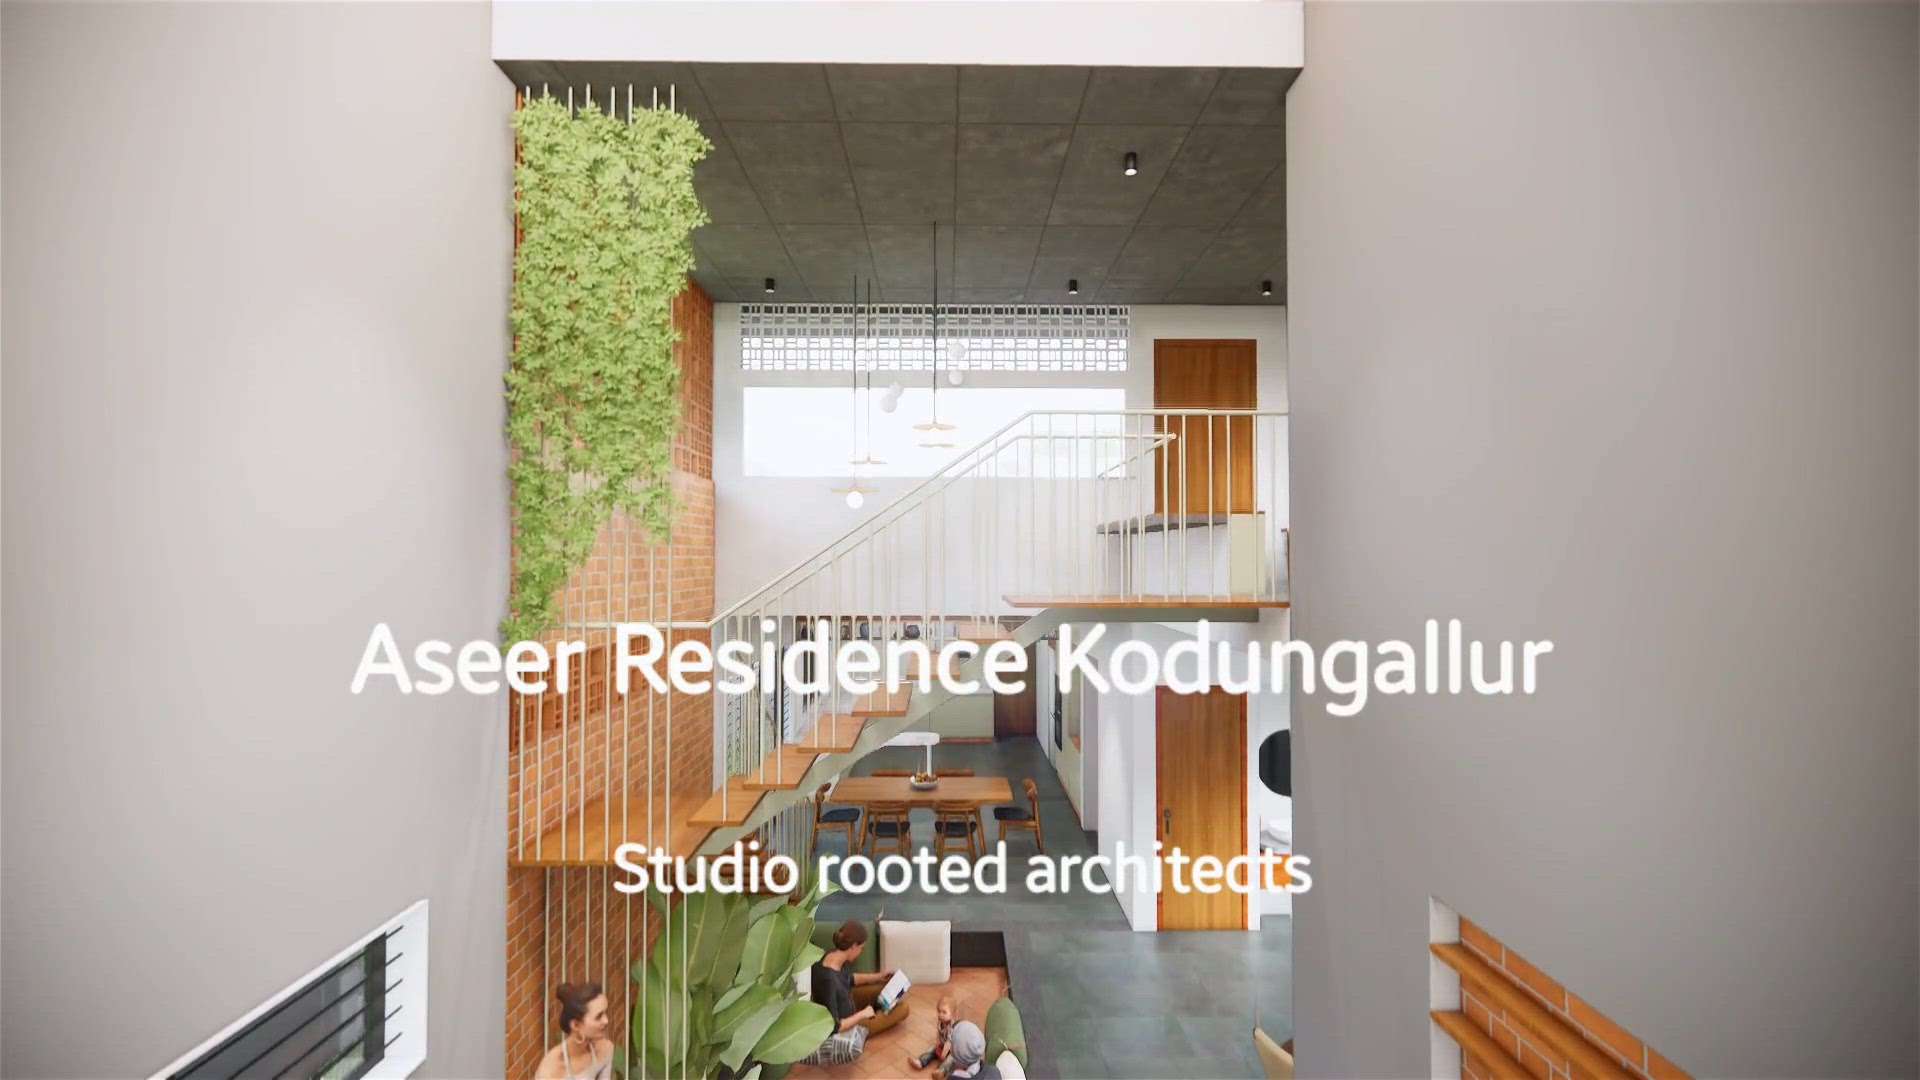 Aseer Residence Kodungallur
#tropical #Architect #design #keralastyle #SlopingRoofHouse #nature #tropicalmodern #tropicalarchitecture